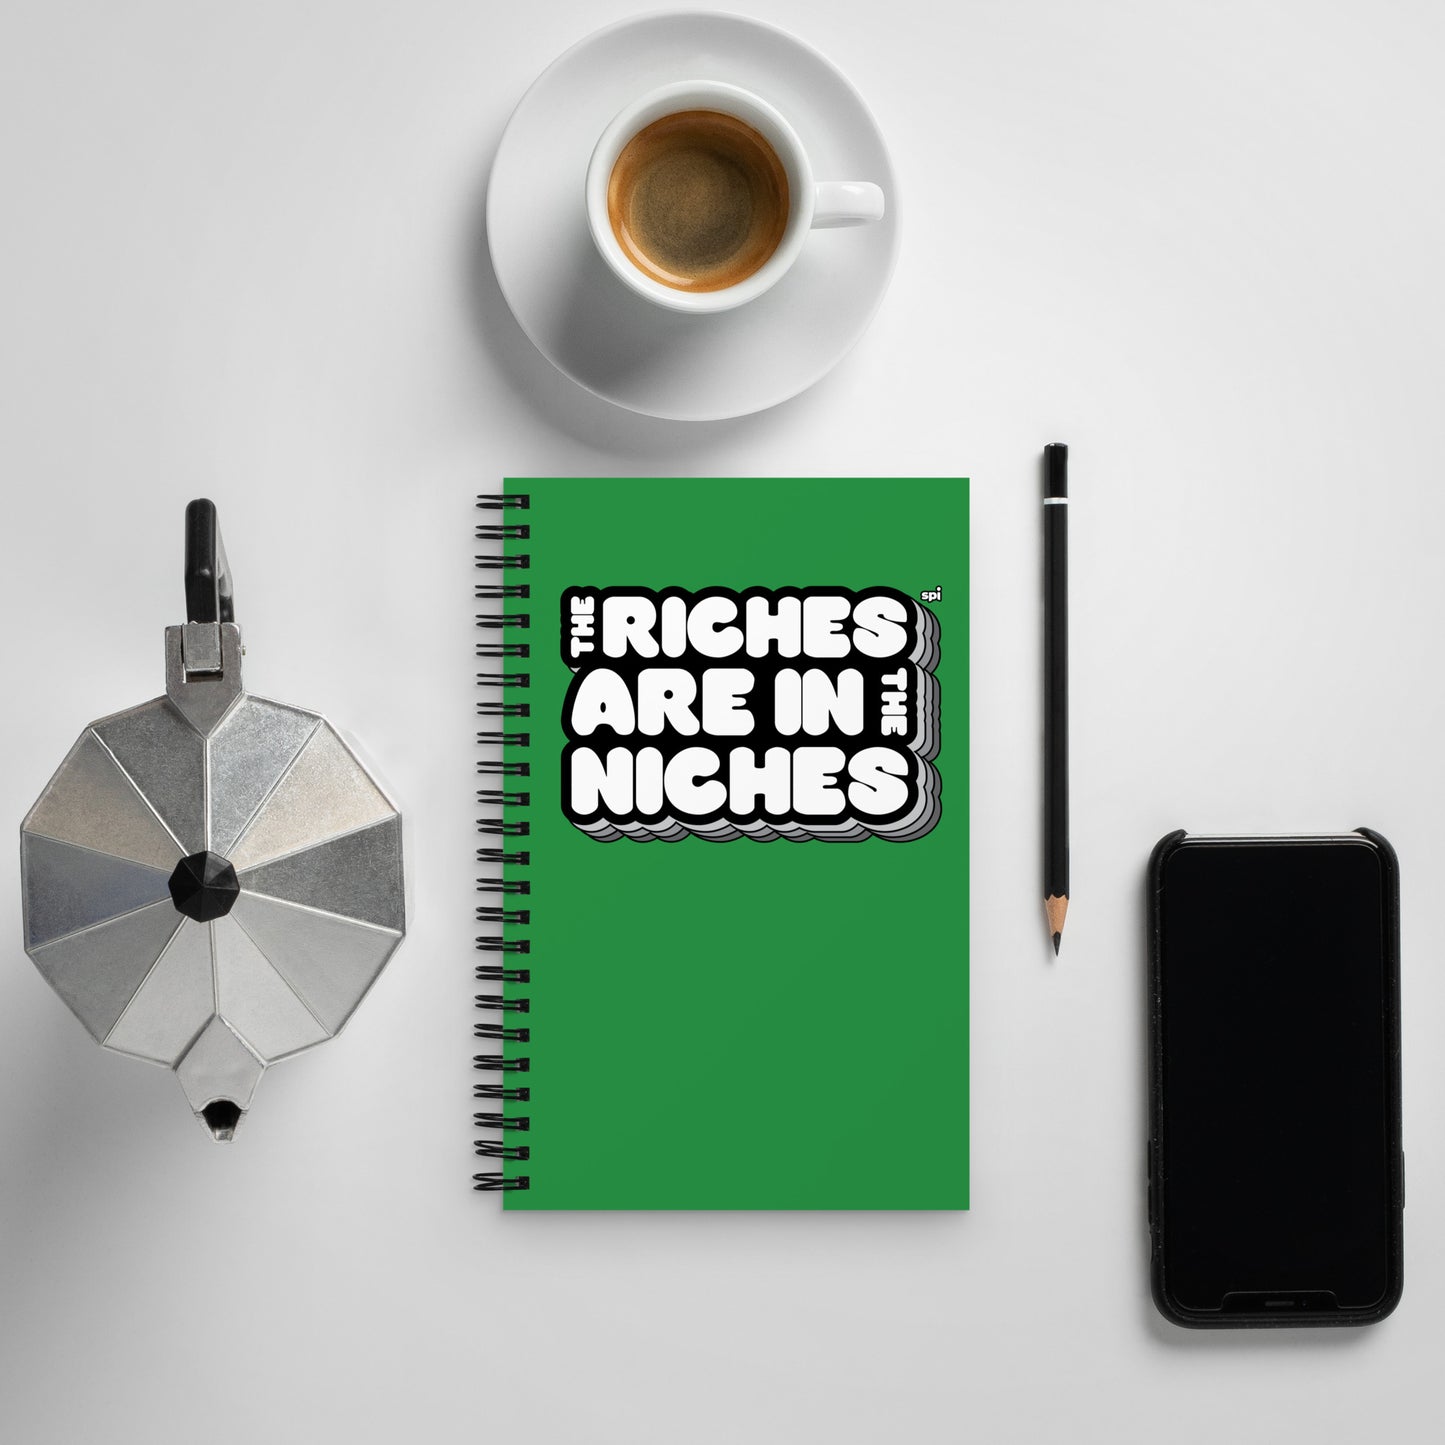 The Riches are in the Niches spiral notebook